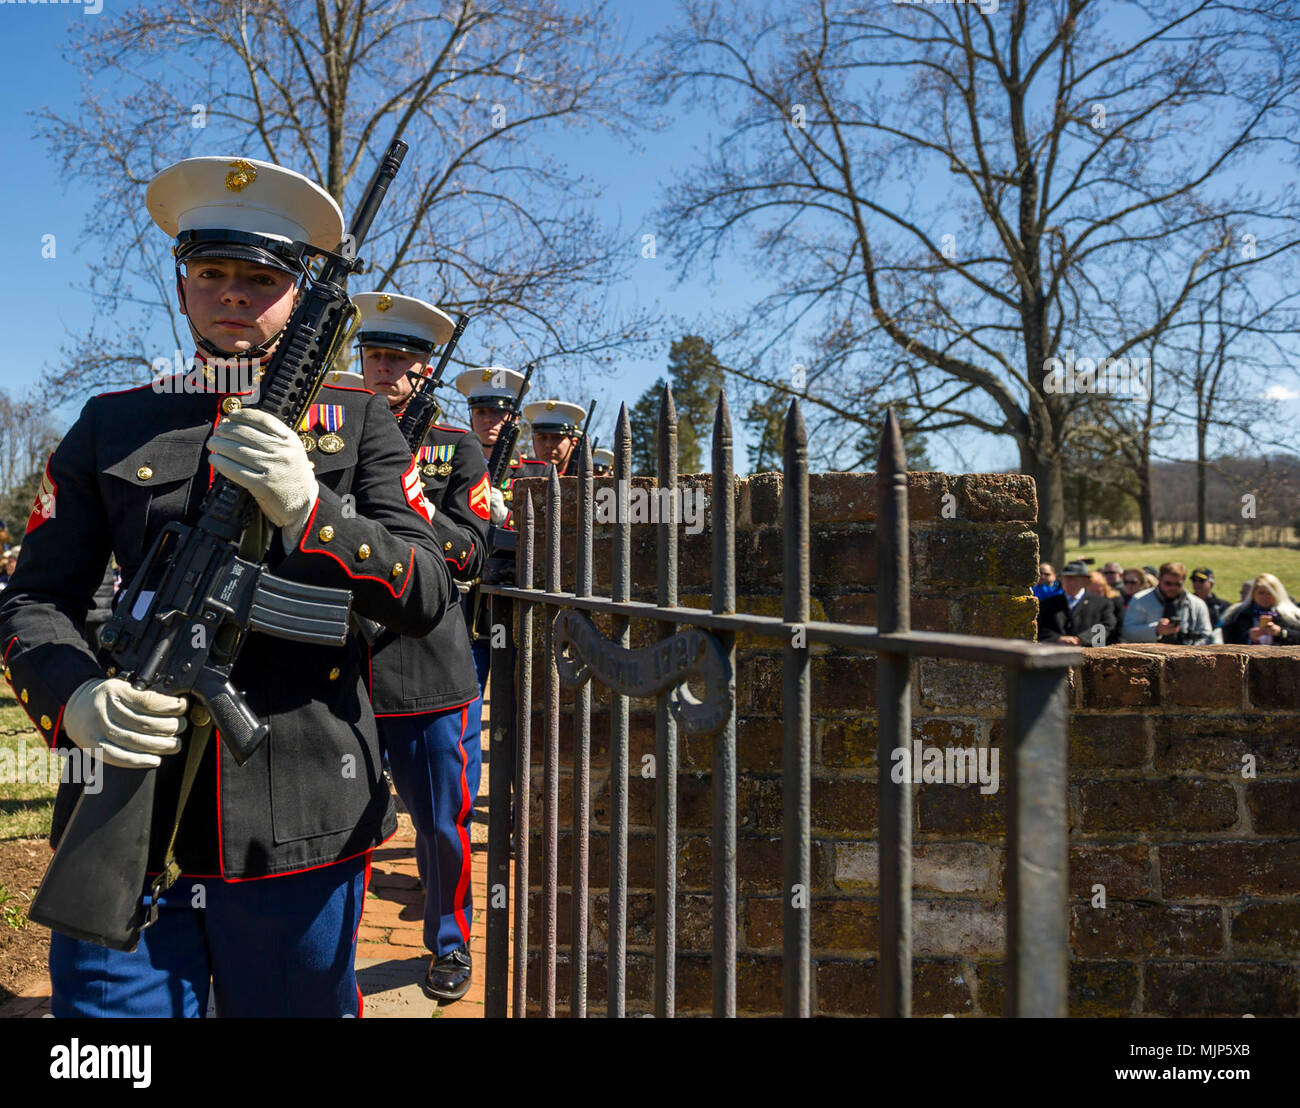 U.S. Marines with Marine Corps Base Quantico Ceremonial Platoon enter the cemetery for the Presidential wreath laying ceremony held in honor of the 4th President of the United States, James Madison, also known as the Father of the Constitution, at his home at Montpelier, Orange, Va., March 16, 2018. This event was held in commemoration of the 267th anniversary of the birth of Madison, born in 1751, and has also been decreed as James Madison Appreciation Day for the Commonwealth of Virginia. Armed Forces and civilians displaying courage bravery dedication commitment and sacrifice Stock Photo